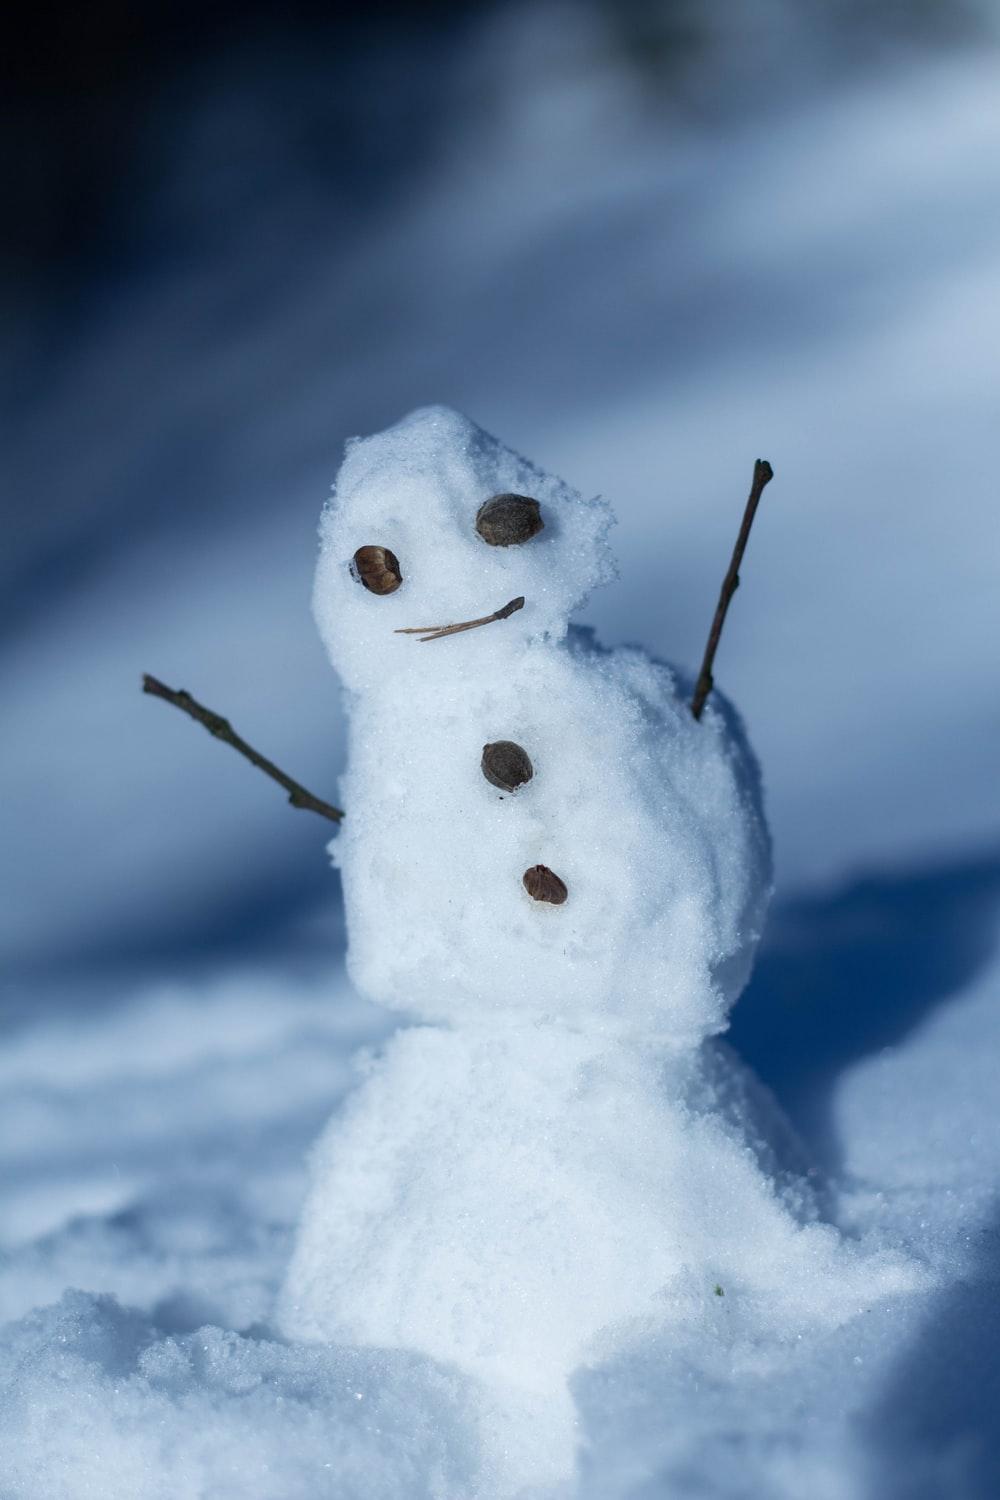 Snowman Picture. Download Free Image